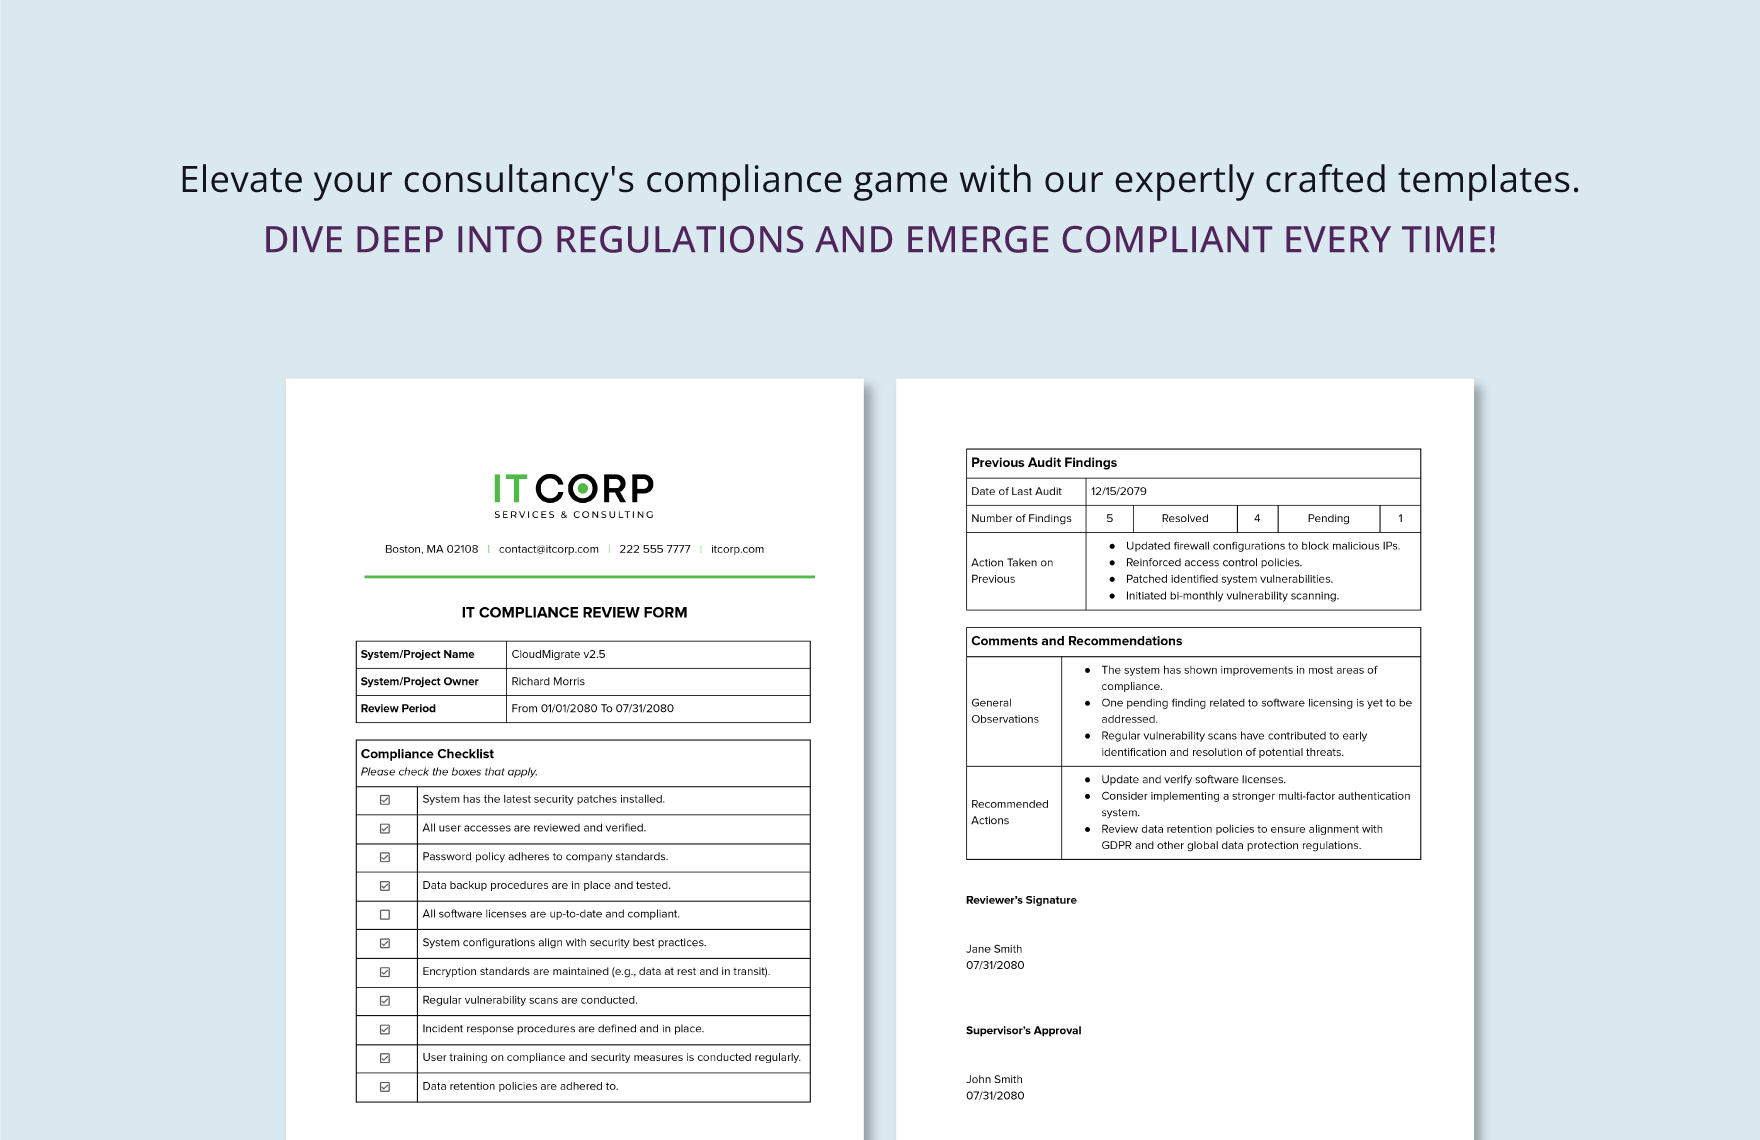 IT Compliance Review Form Template